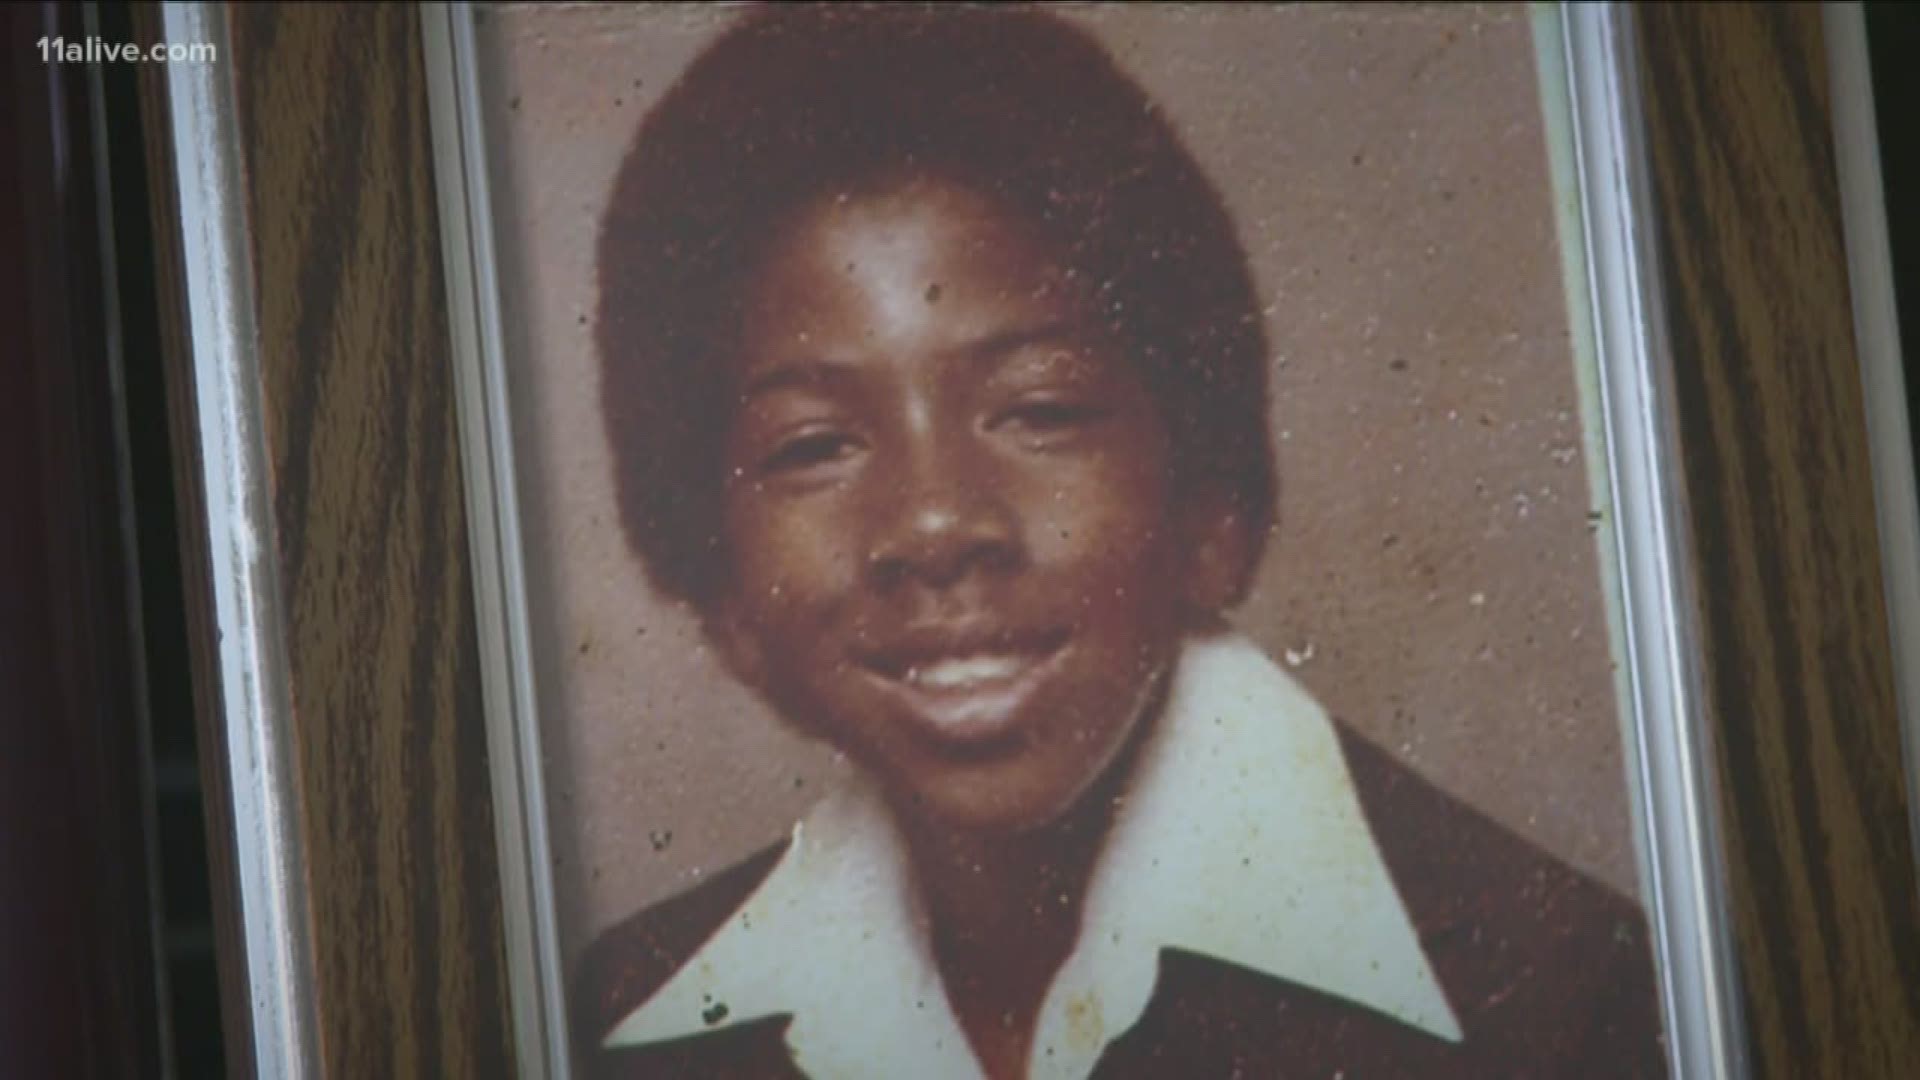 Alfred Evans was just 14 when he was murdered in 1979, marking the start of a killing spree. His mother, Lois, shared her story for the first time.